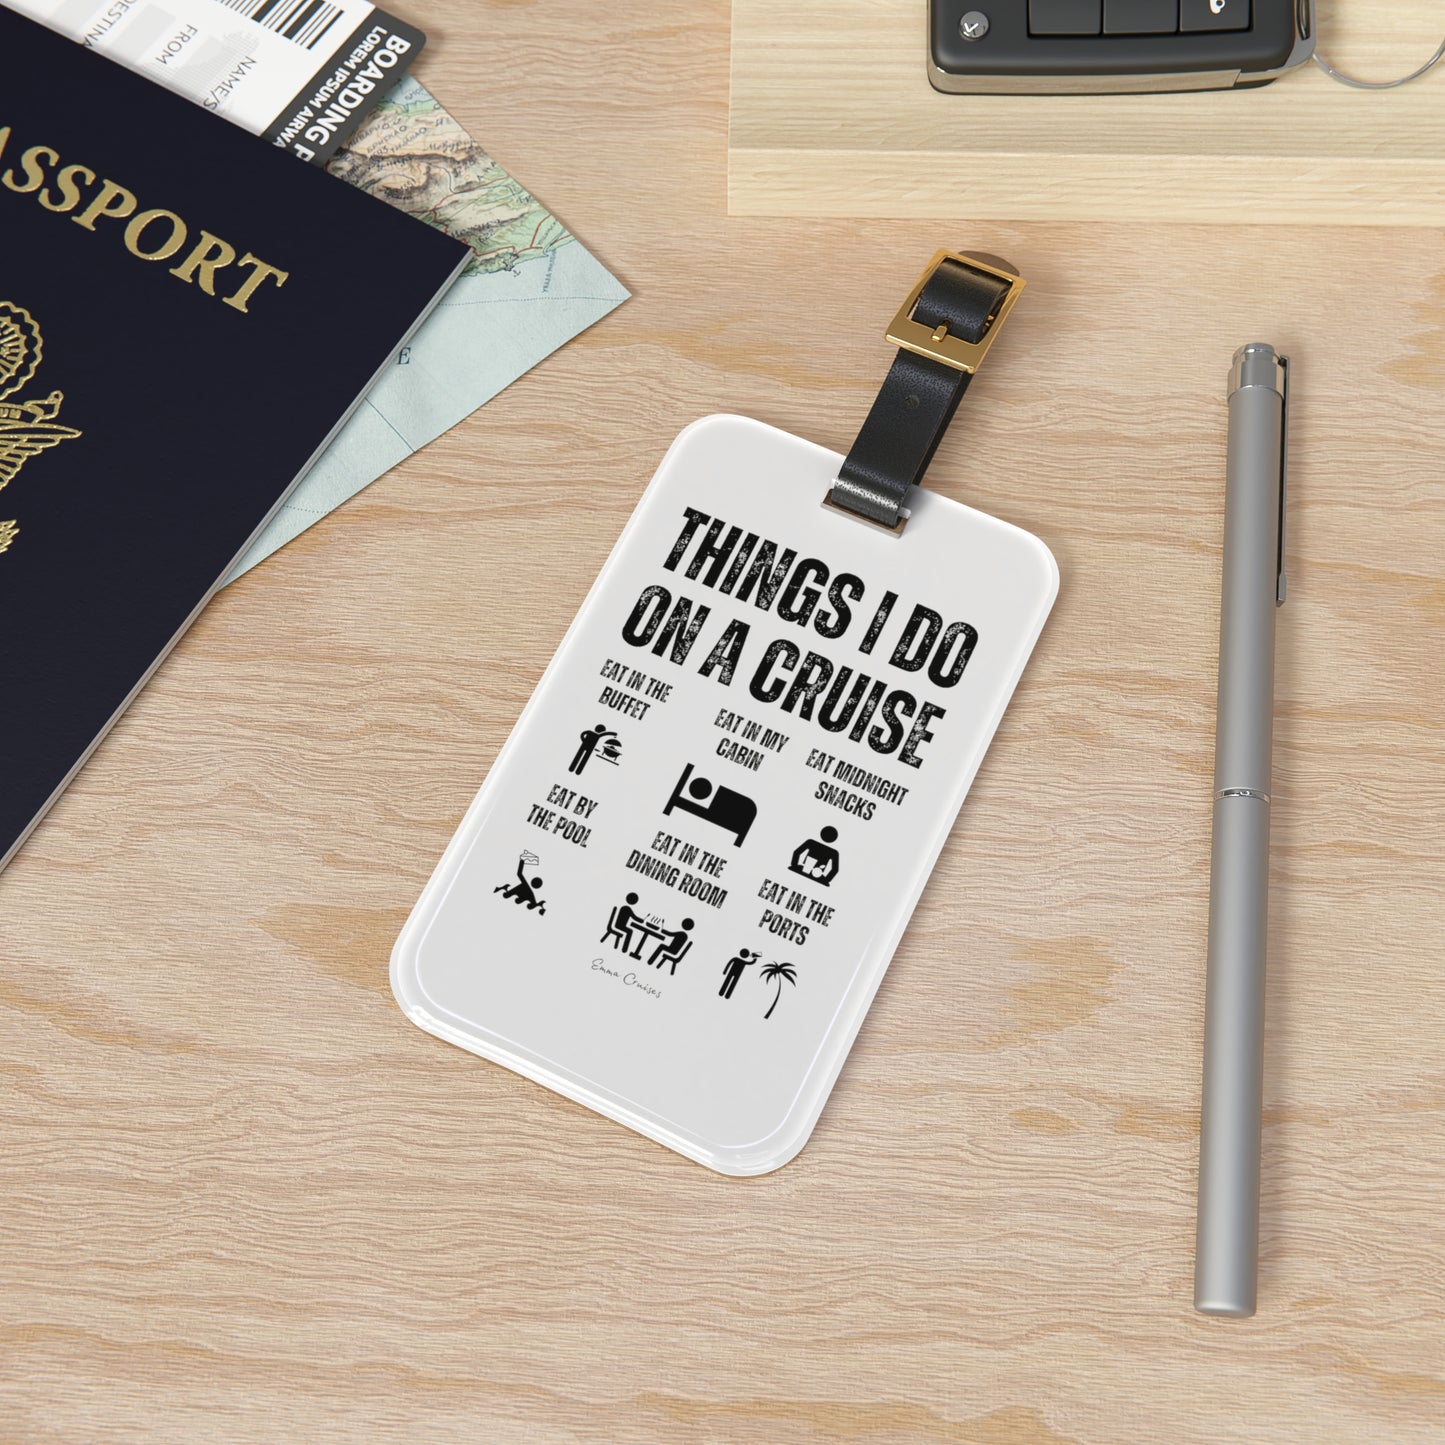 Things I Do on a Cruise - Luggage Tag